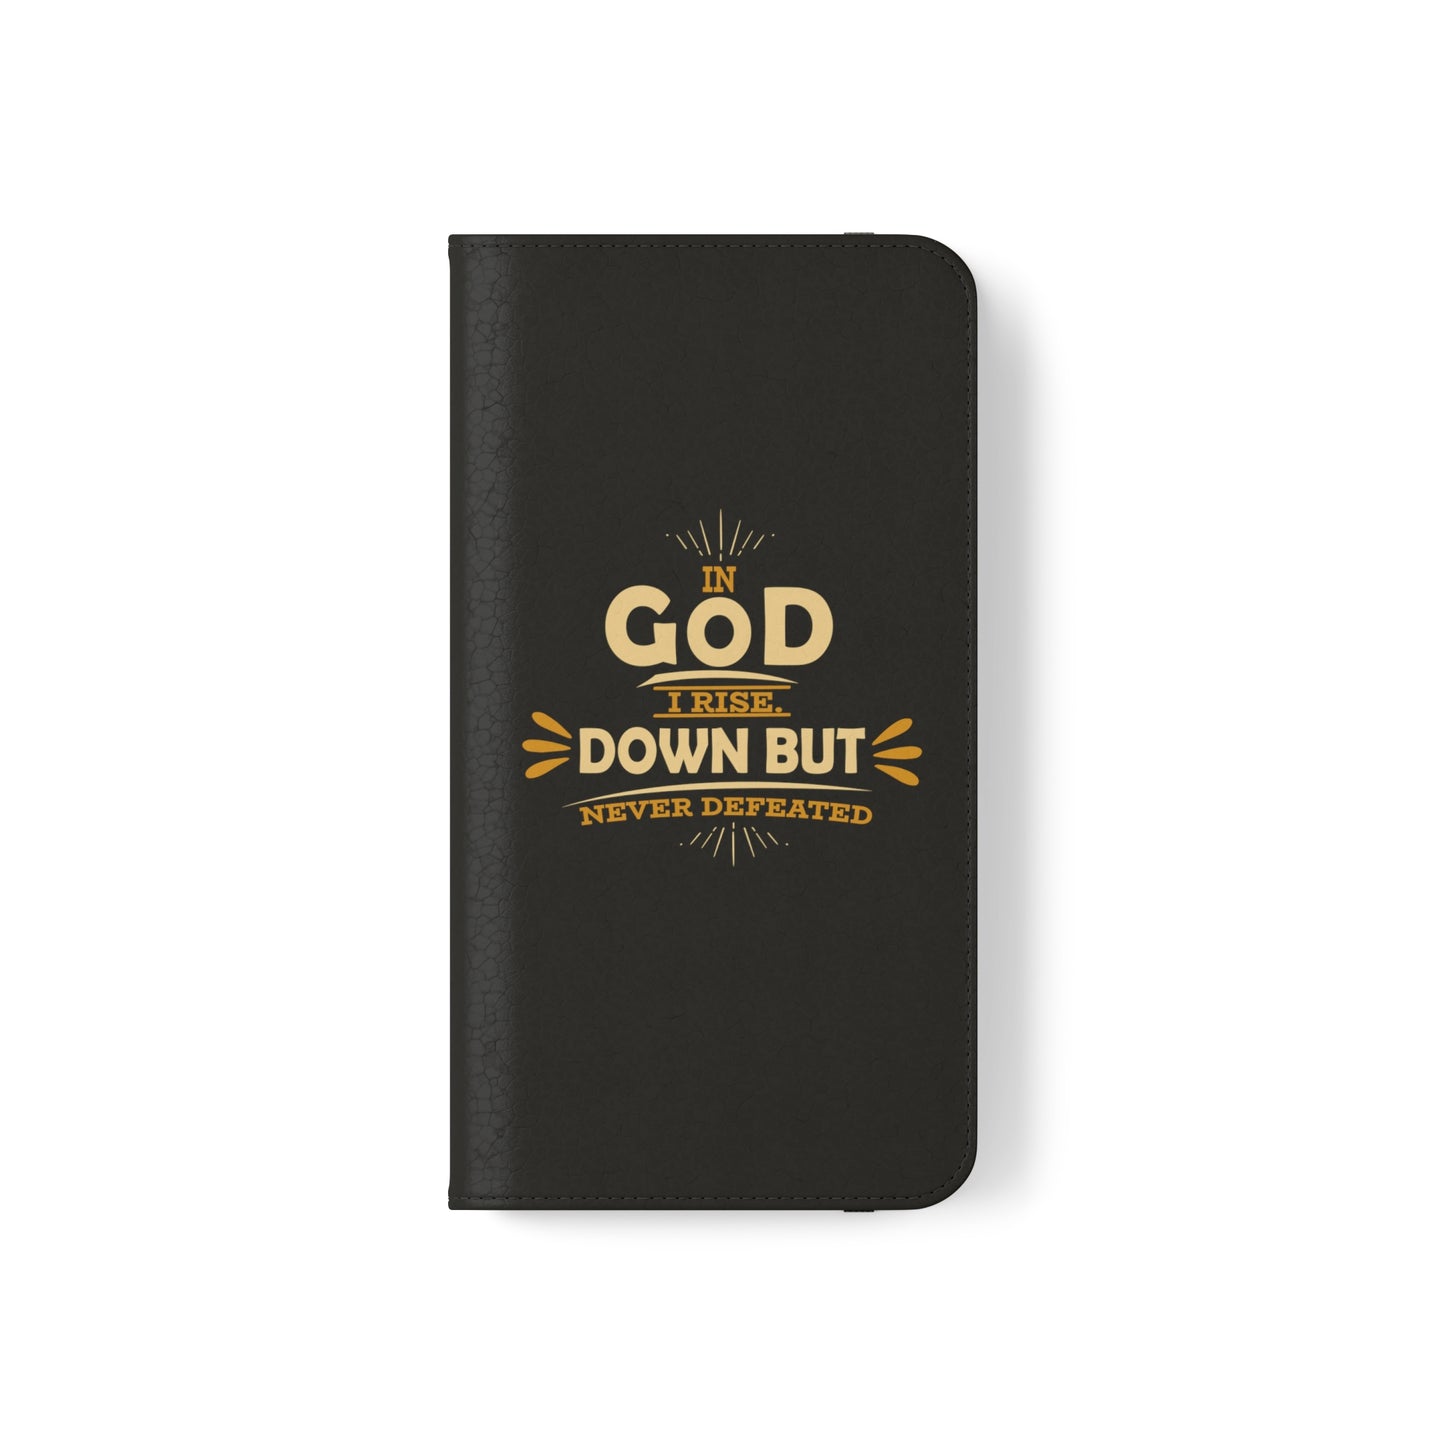 In God I Rise Down But Never Defeated Phone Flip Cases